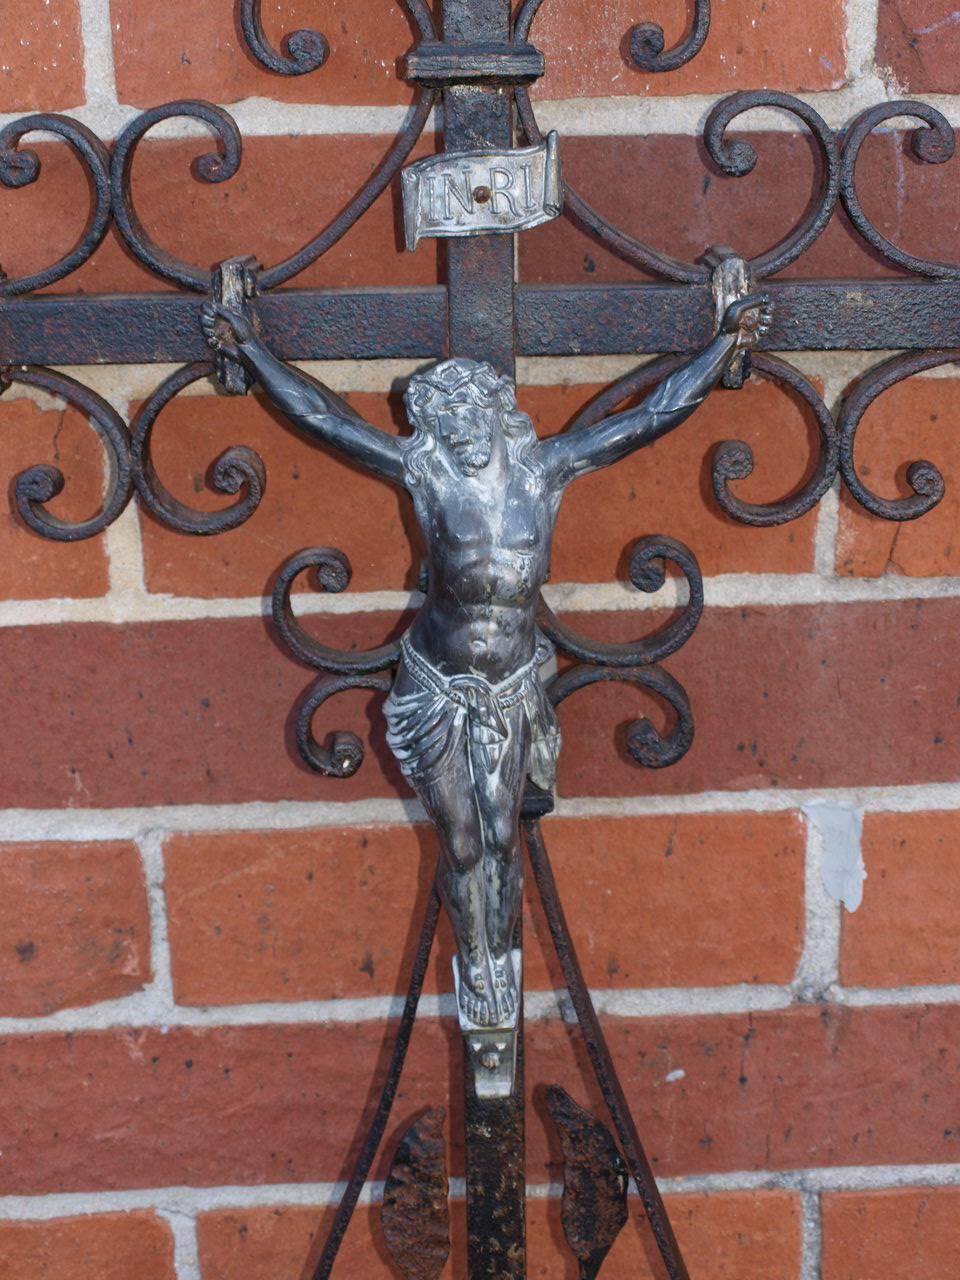 A wonderful late 19th century Garden Crucifix from the North of France. Very well constructed in hand wrought iron. Beautiful to wall mount or to embed into a pedestal.